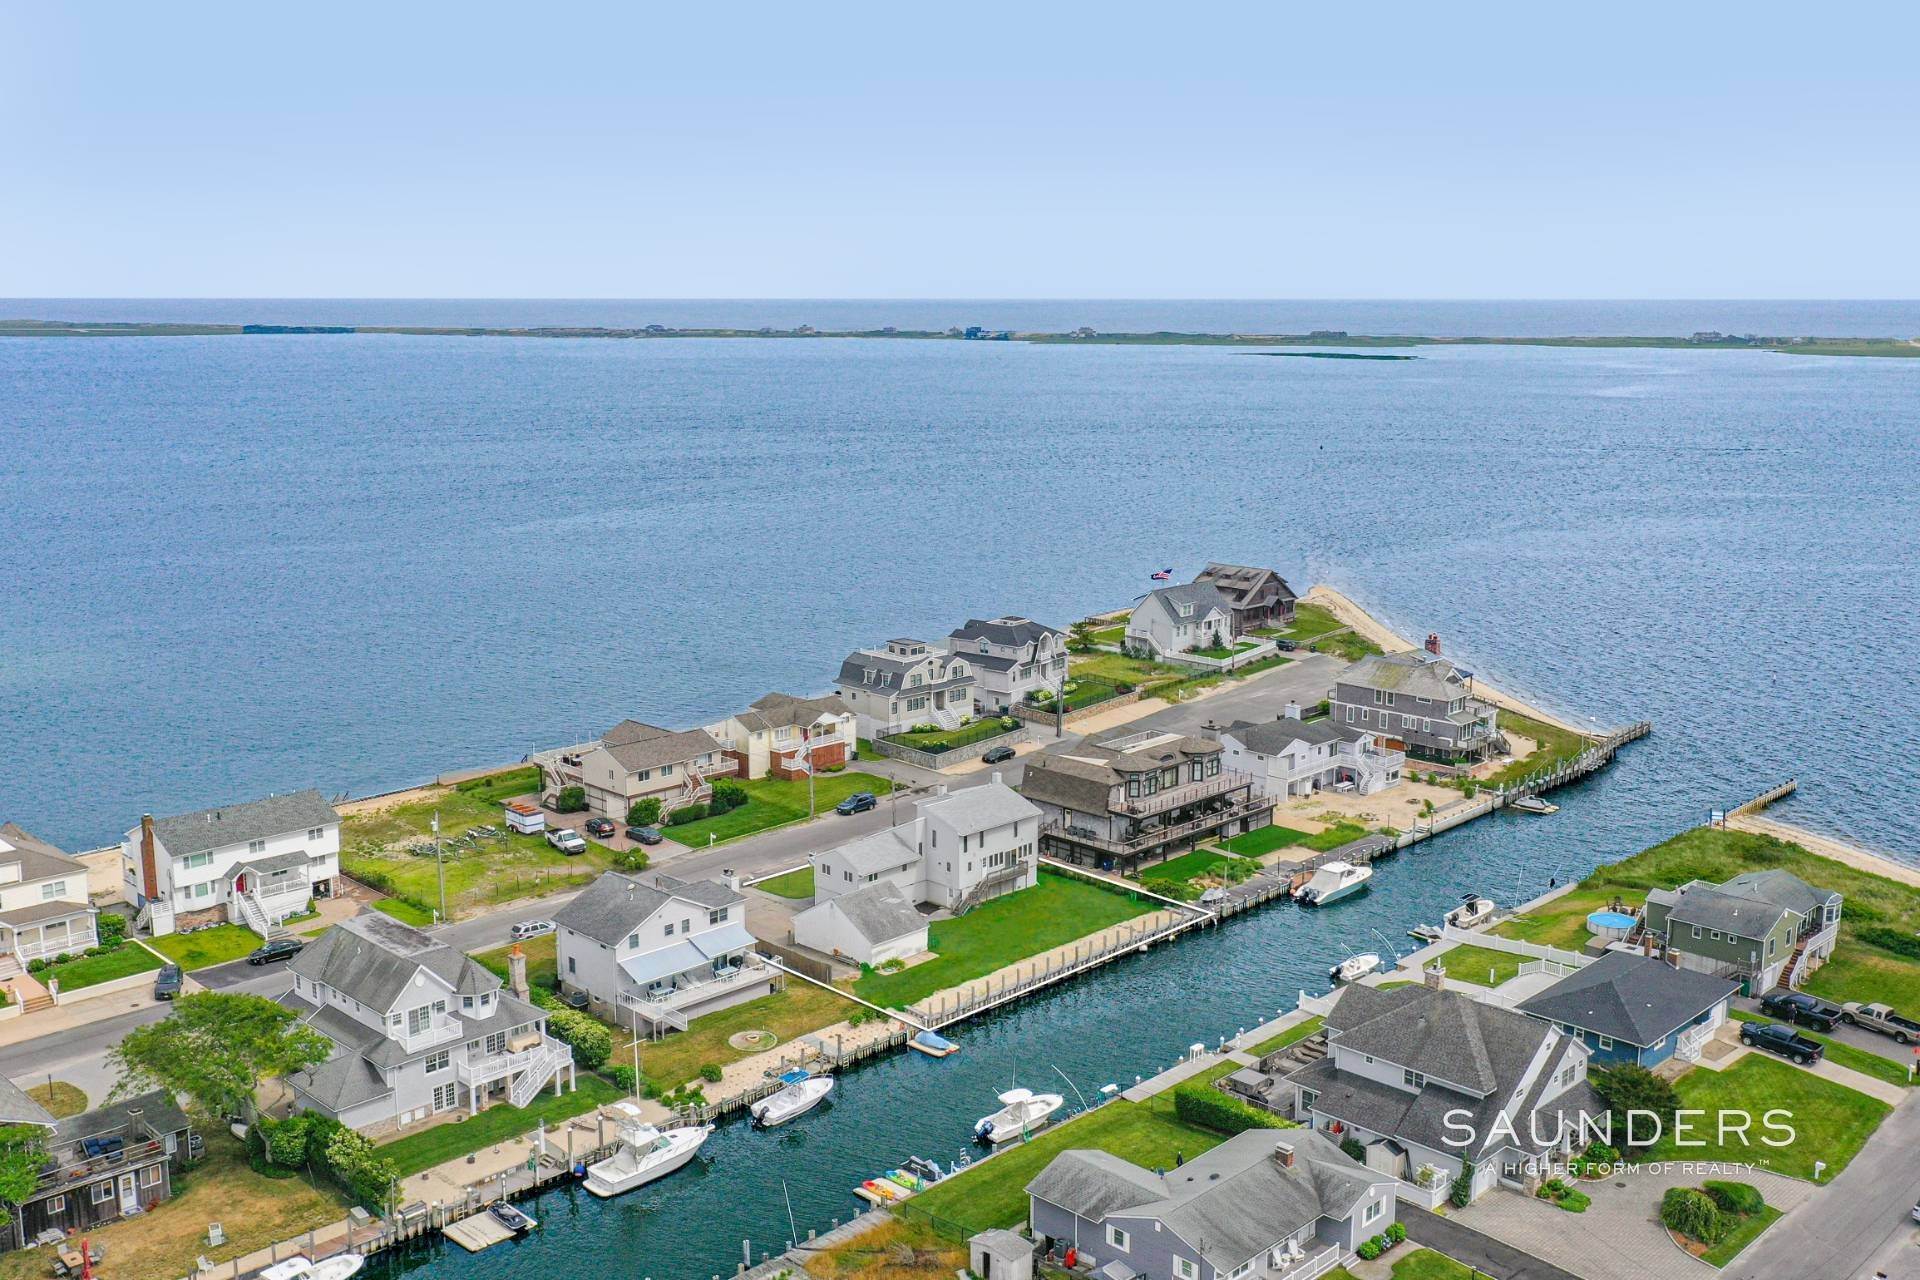 Single Family Homes for Sale at Boater's Paradise In Shinnecock Shores 34 Shinnecock Road, East Quogue, NY 11942